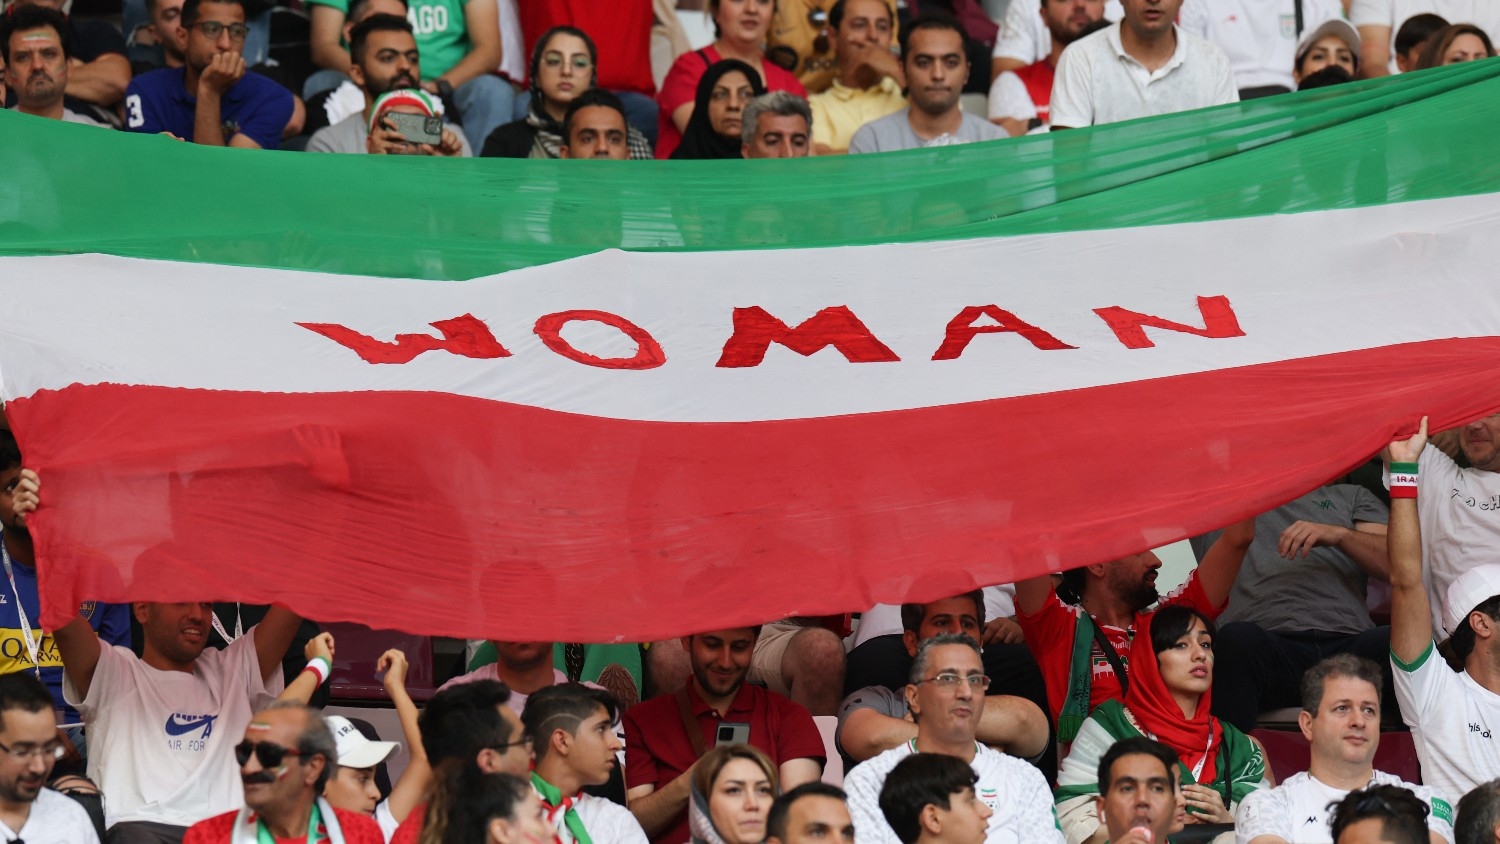 Iran supporters wave their national flag bearing the word "Woman" during the Qatar 2022 World Cup football match between England and Iran in Doha on 21 November 2022.